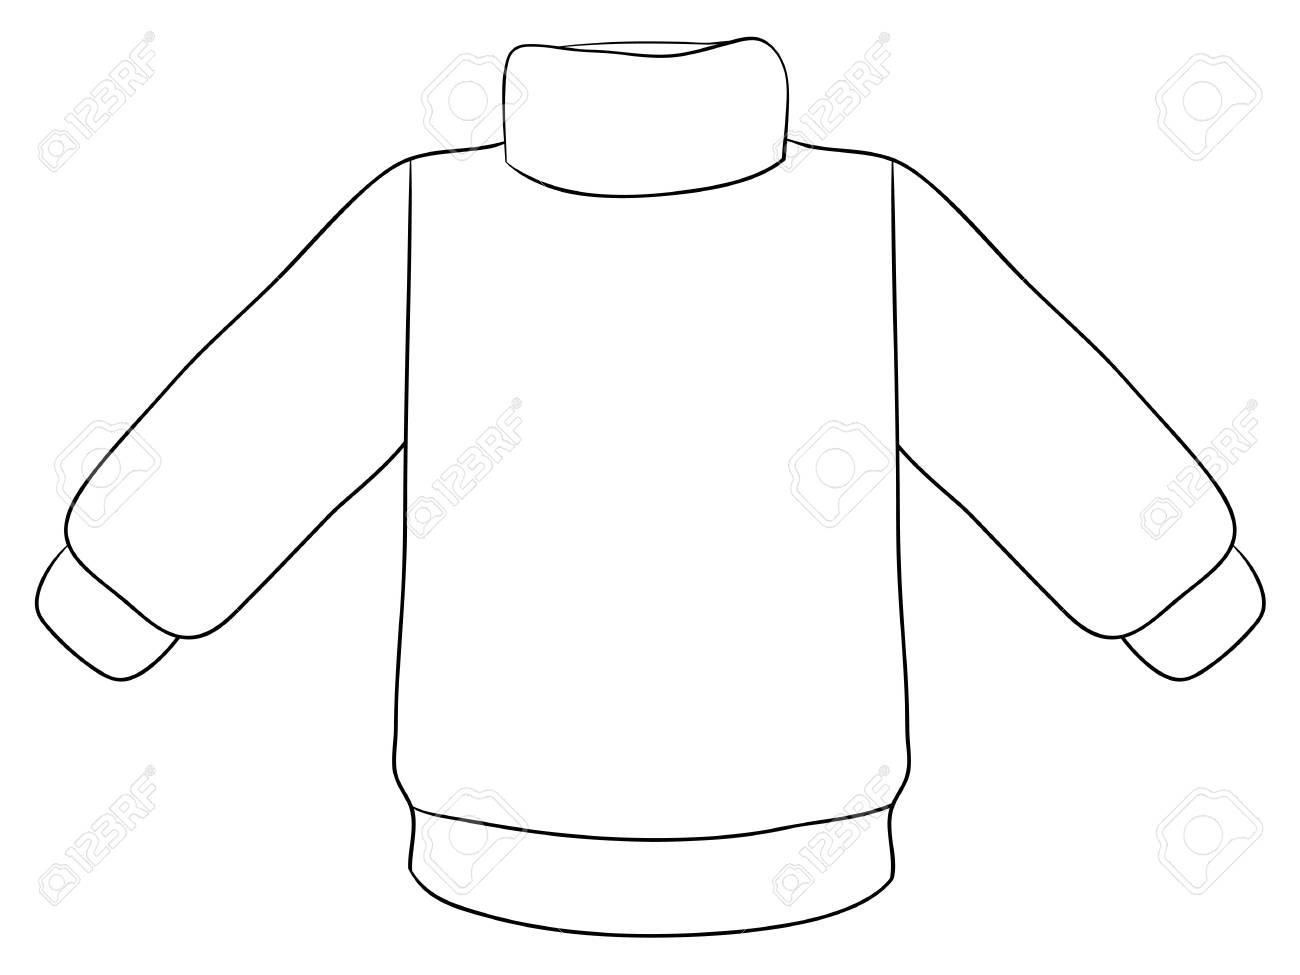 A cute christmas sweater image for relaxing activitya coloring bookpage for children and adultsline art style illustration for printposter design royalty free svg cliparts vectors and stock illustration image